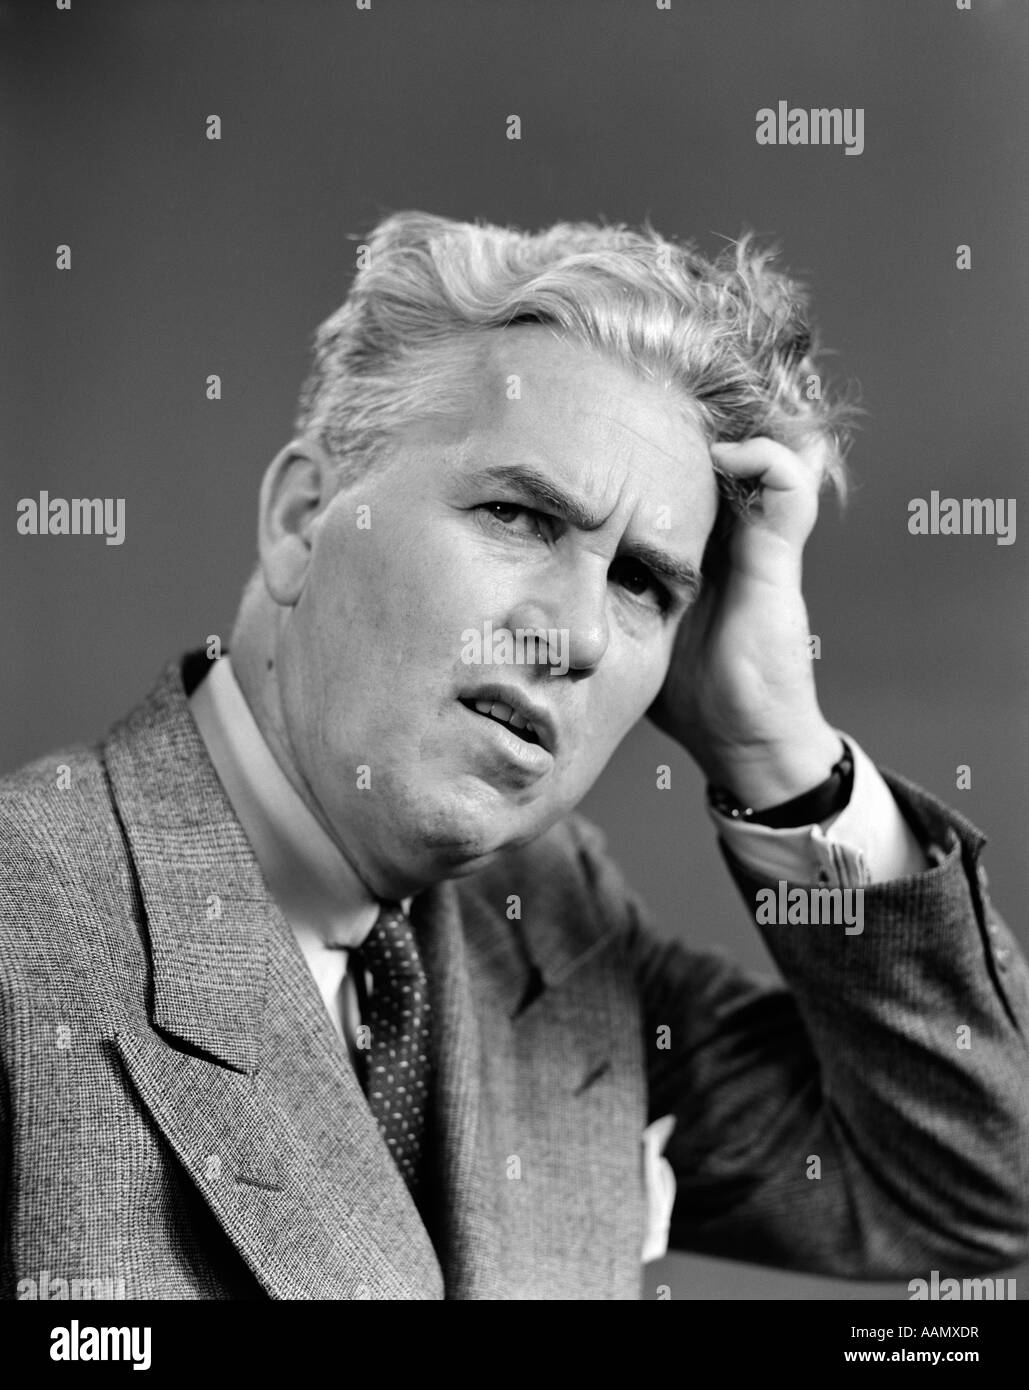 1930s 1940s MAN PORTRAIT HAND HELD UP TO HEAD FACIAL EXPRESSION FORGETFUL CONFUSED CONTEMPLATIVE SUIT TIE BUSINESS Stock Photo